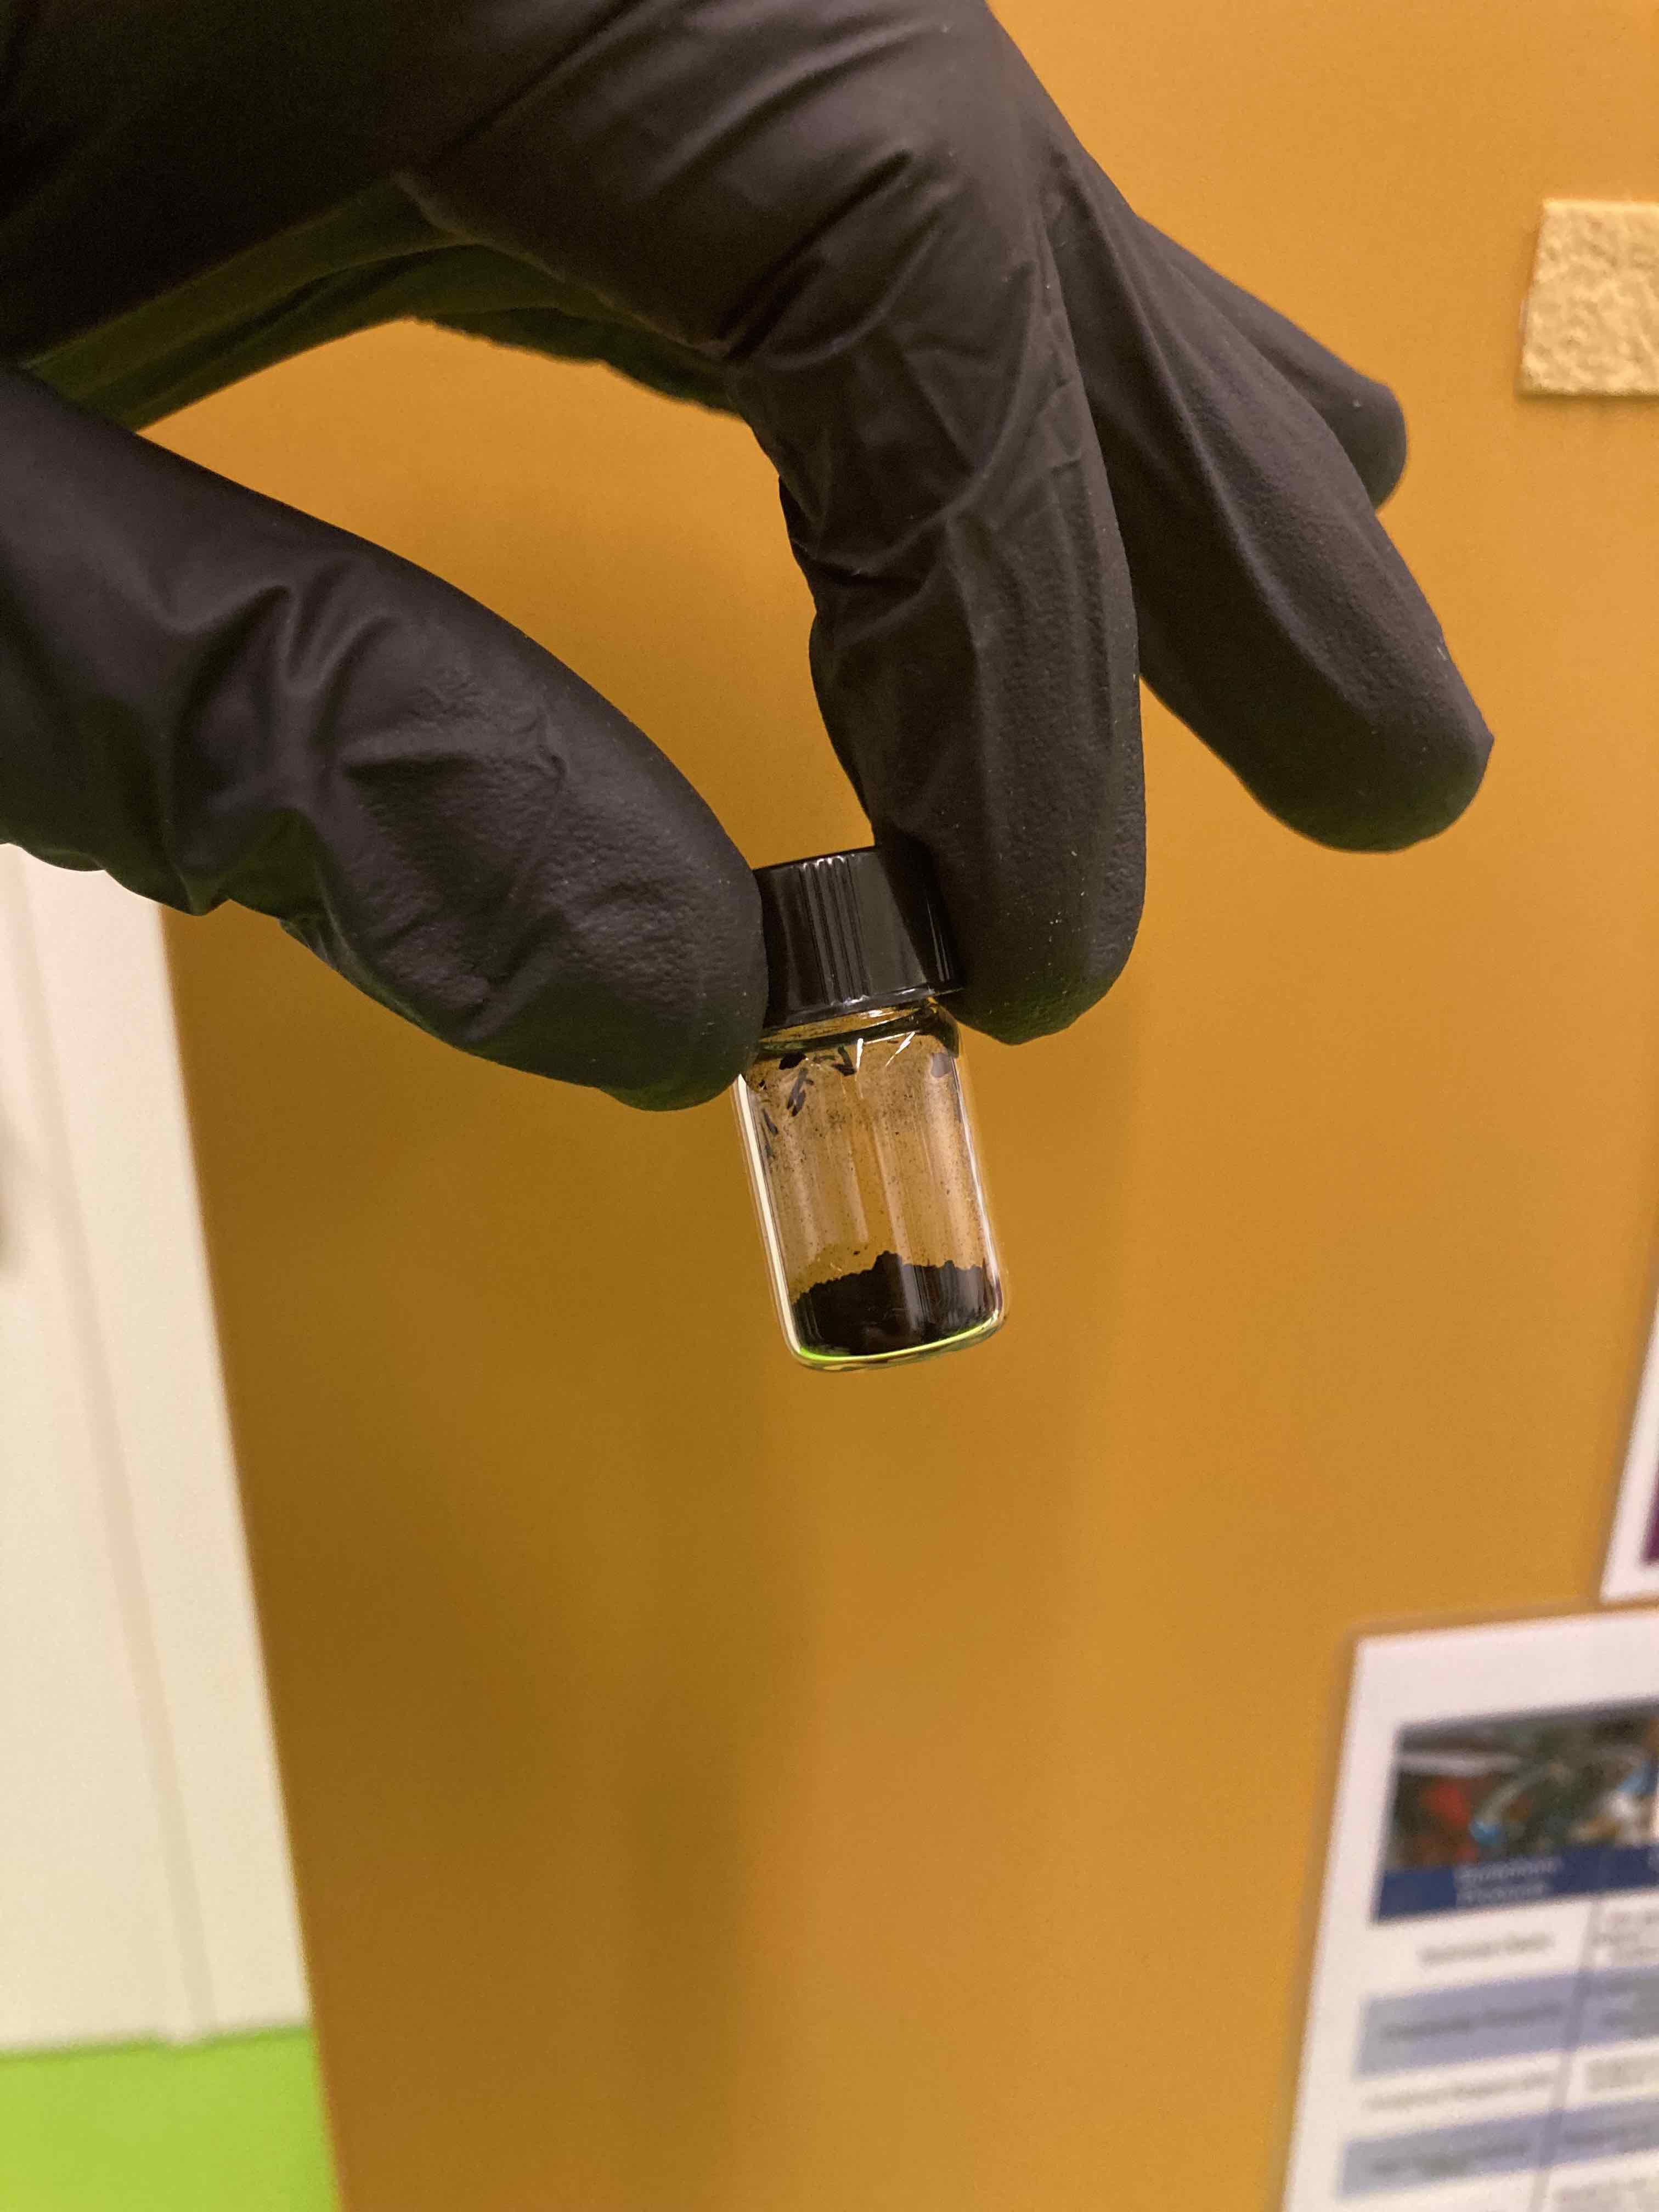 A gloved hand is holding a small glass bottle with dark substance inside